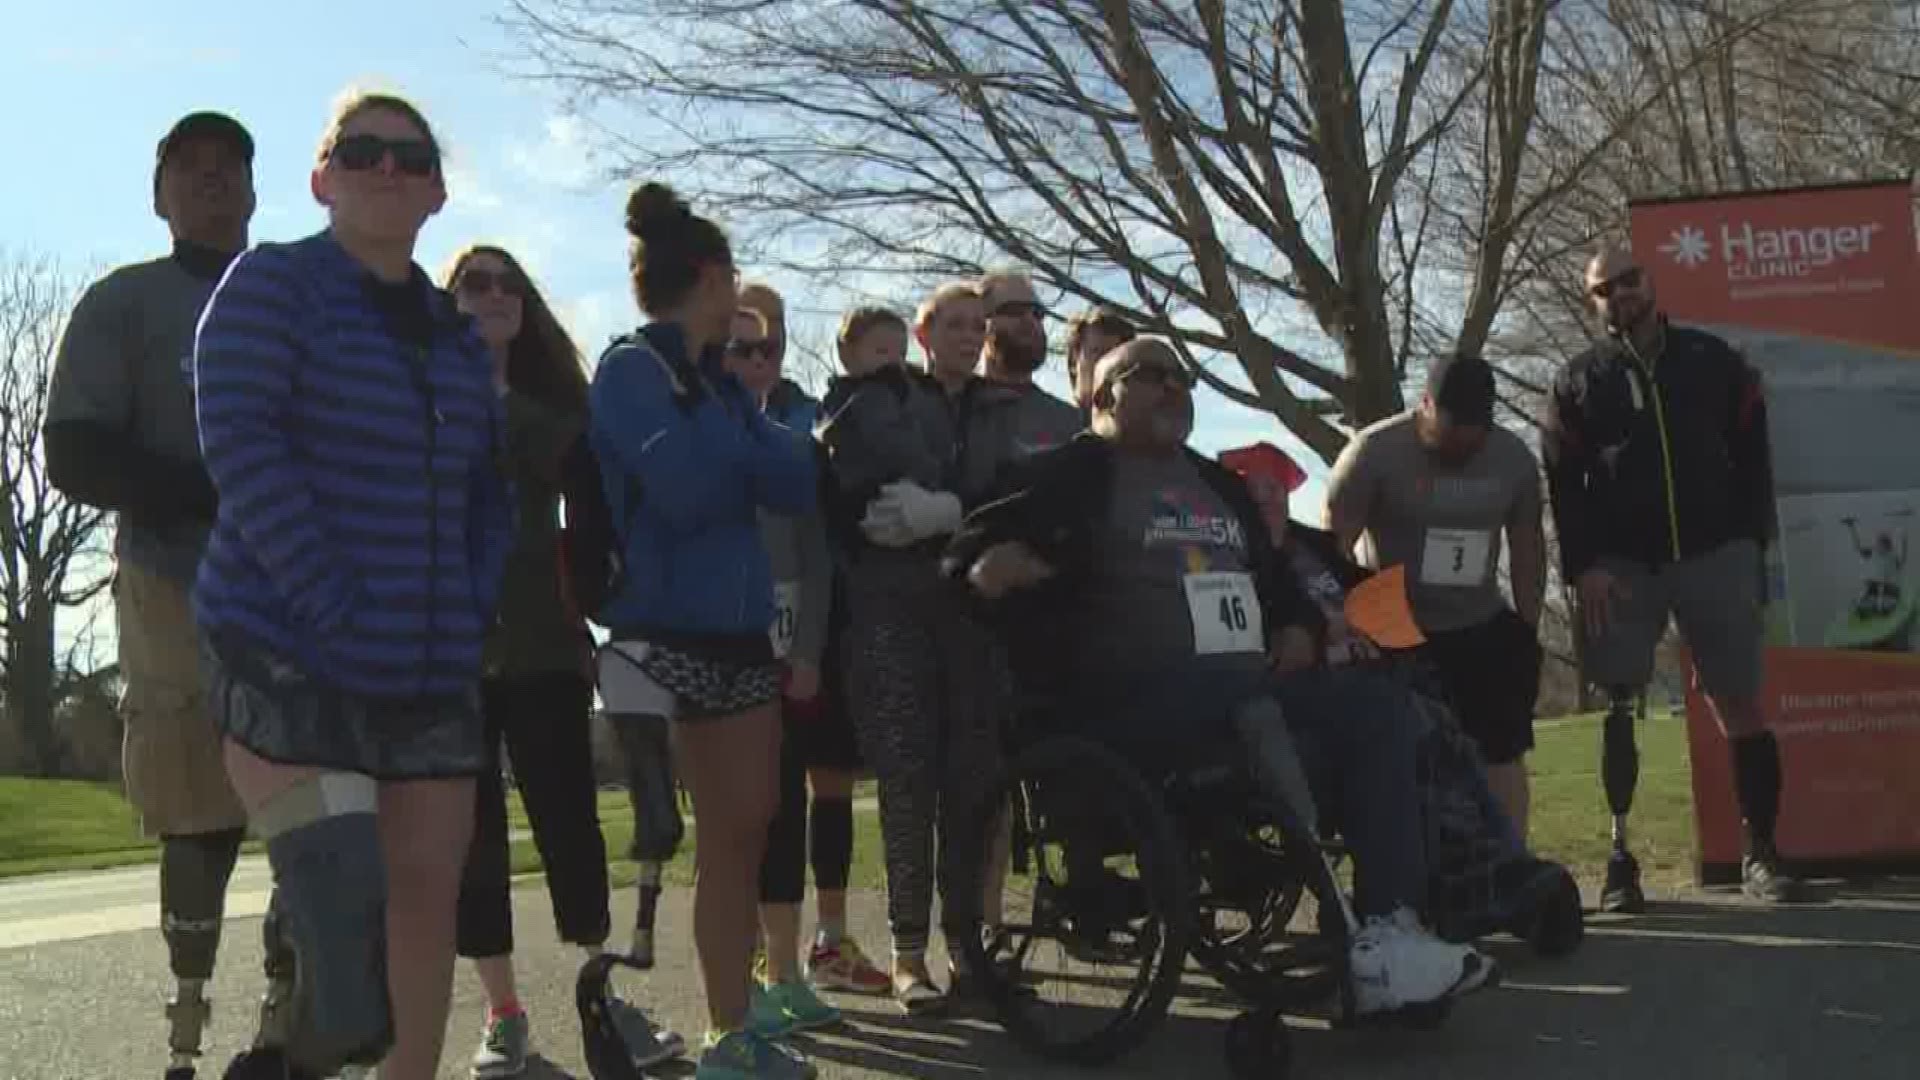 5K for amputees held in Kentwood